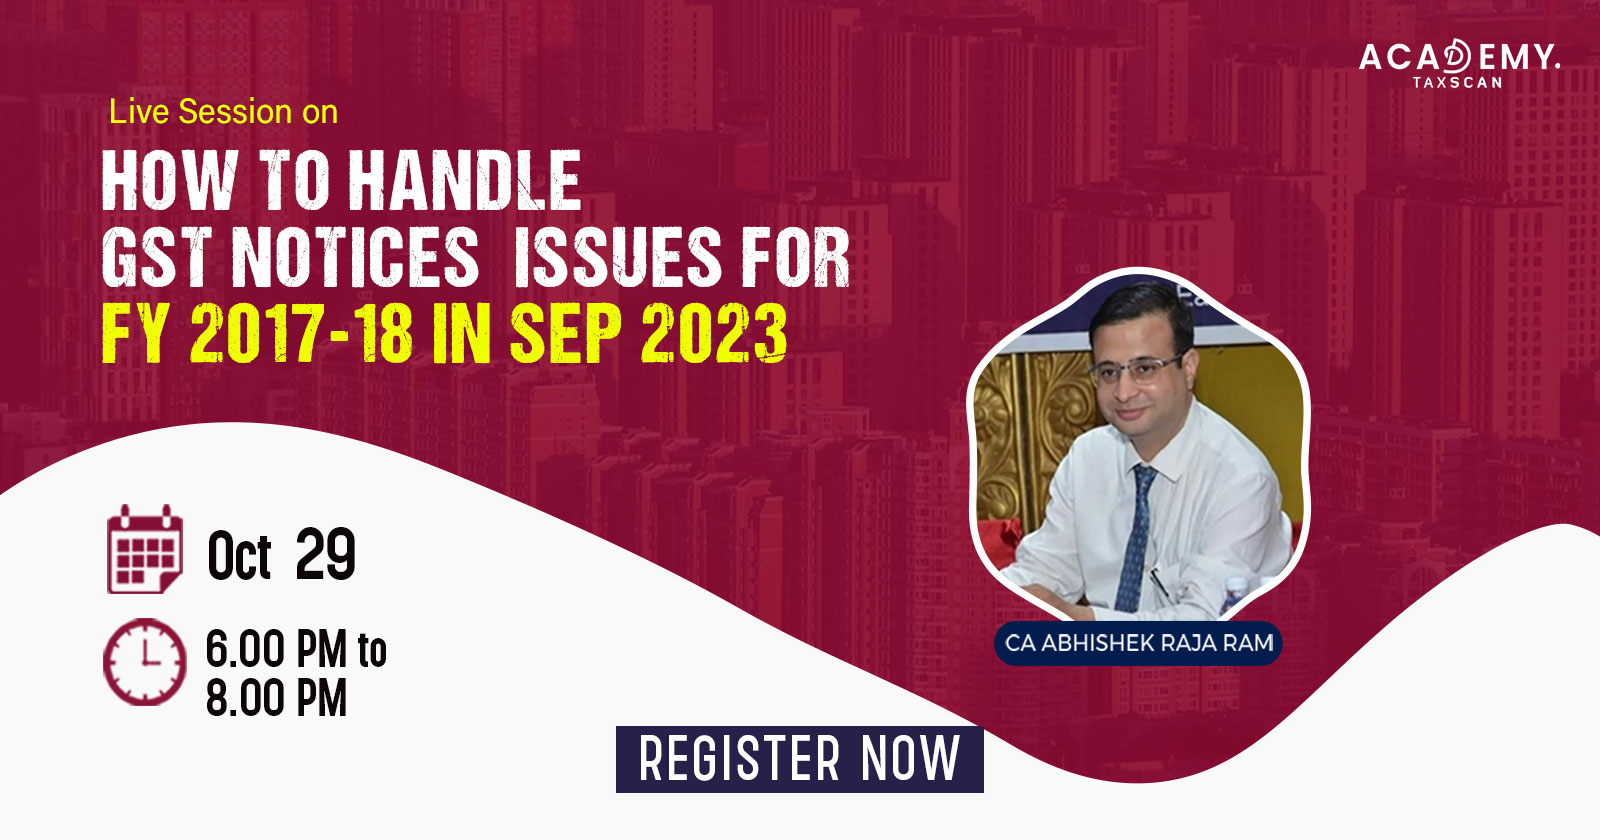 How to Handle GST Notices - GST Notices - GST - FY 2017-18 in Sep 2023 - How to Handle GST Notice - GST Updates 2023 - KnowledgeSharing - OnlineSkills - OnlineAcademy - WebinarTraining - taxscan academy